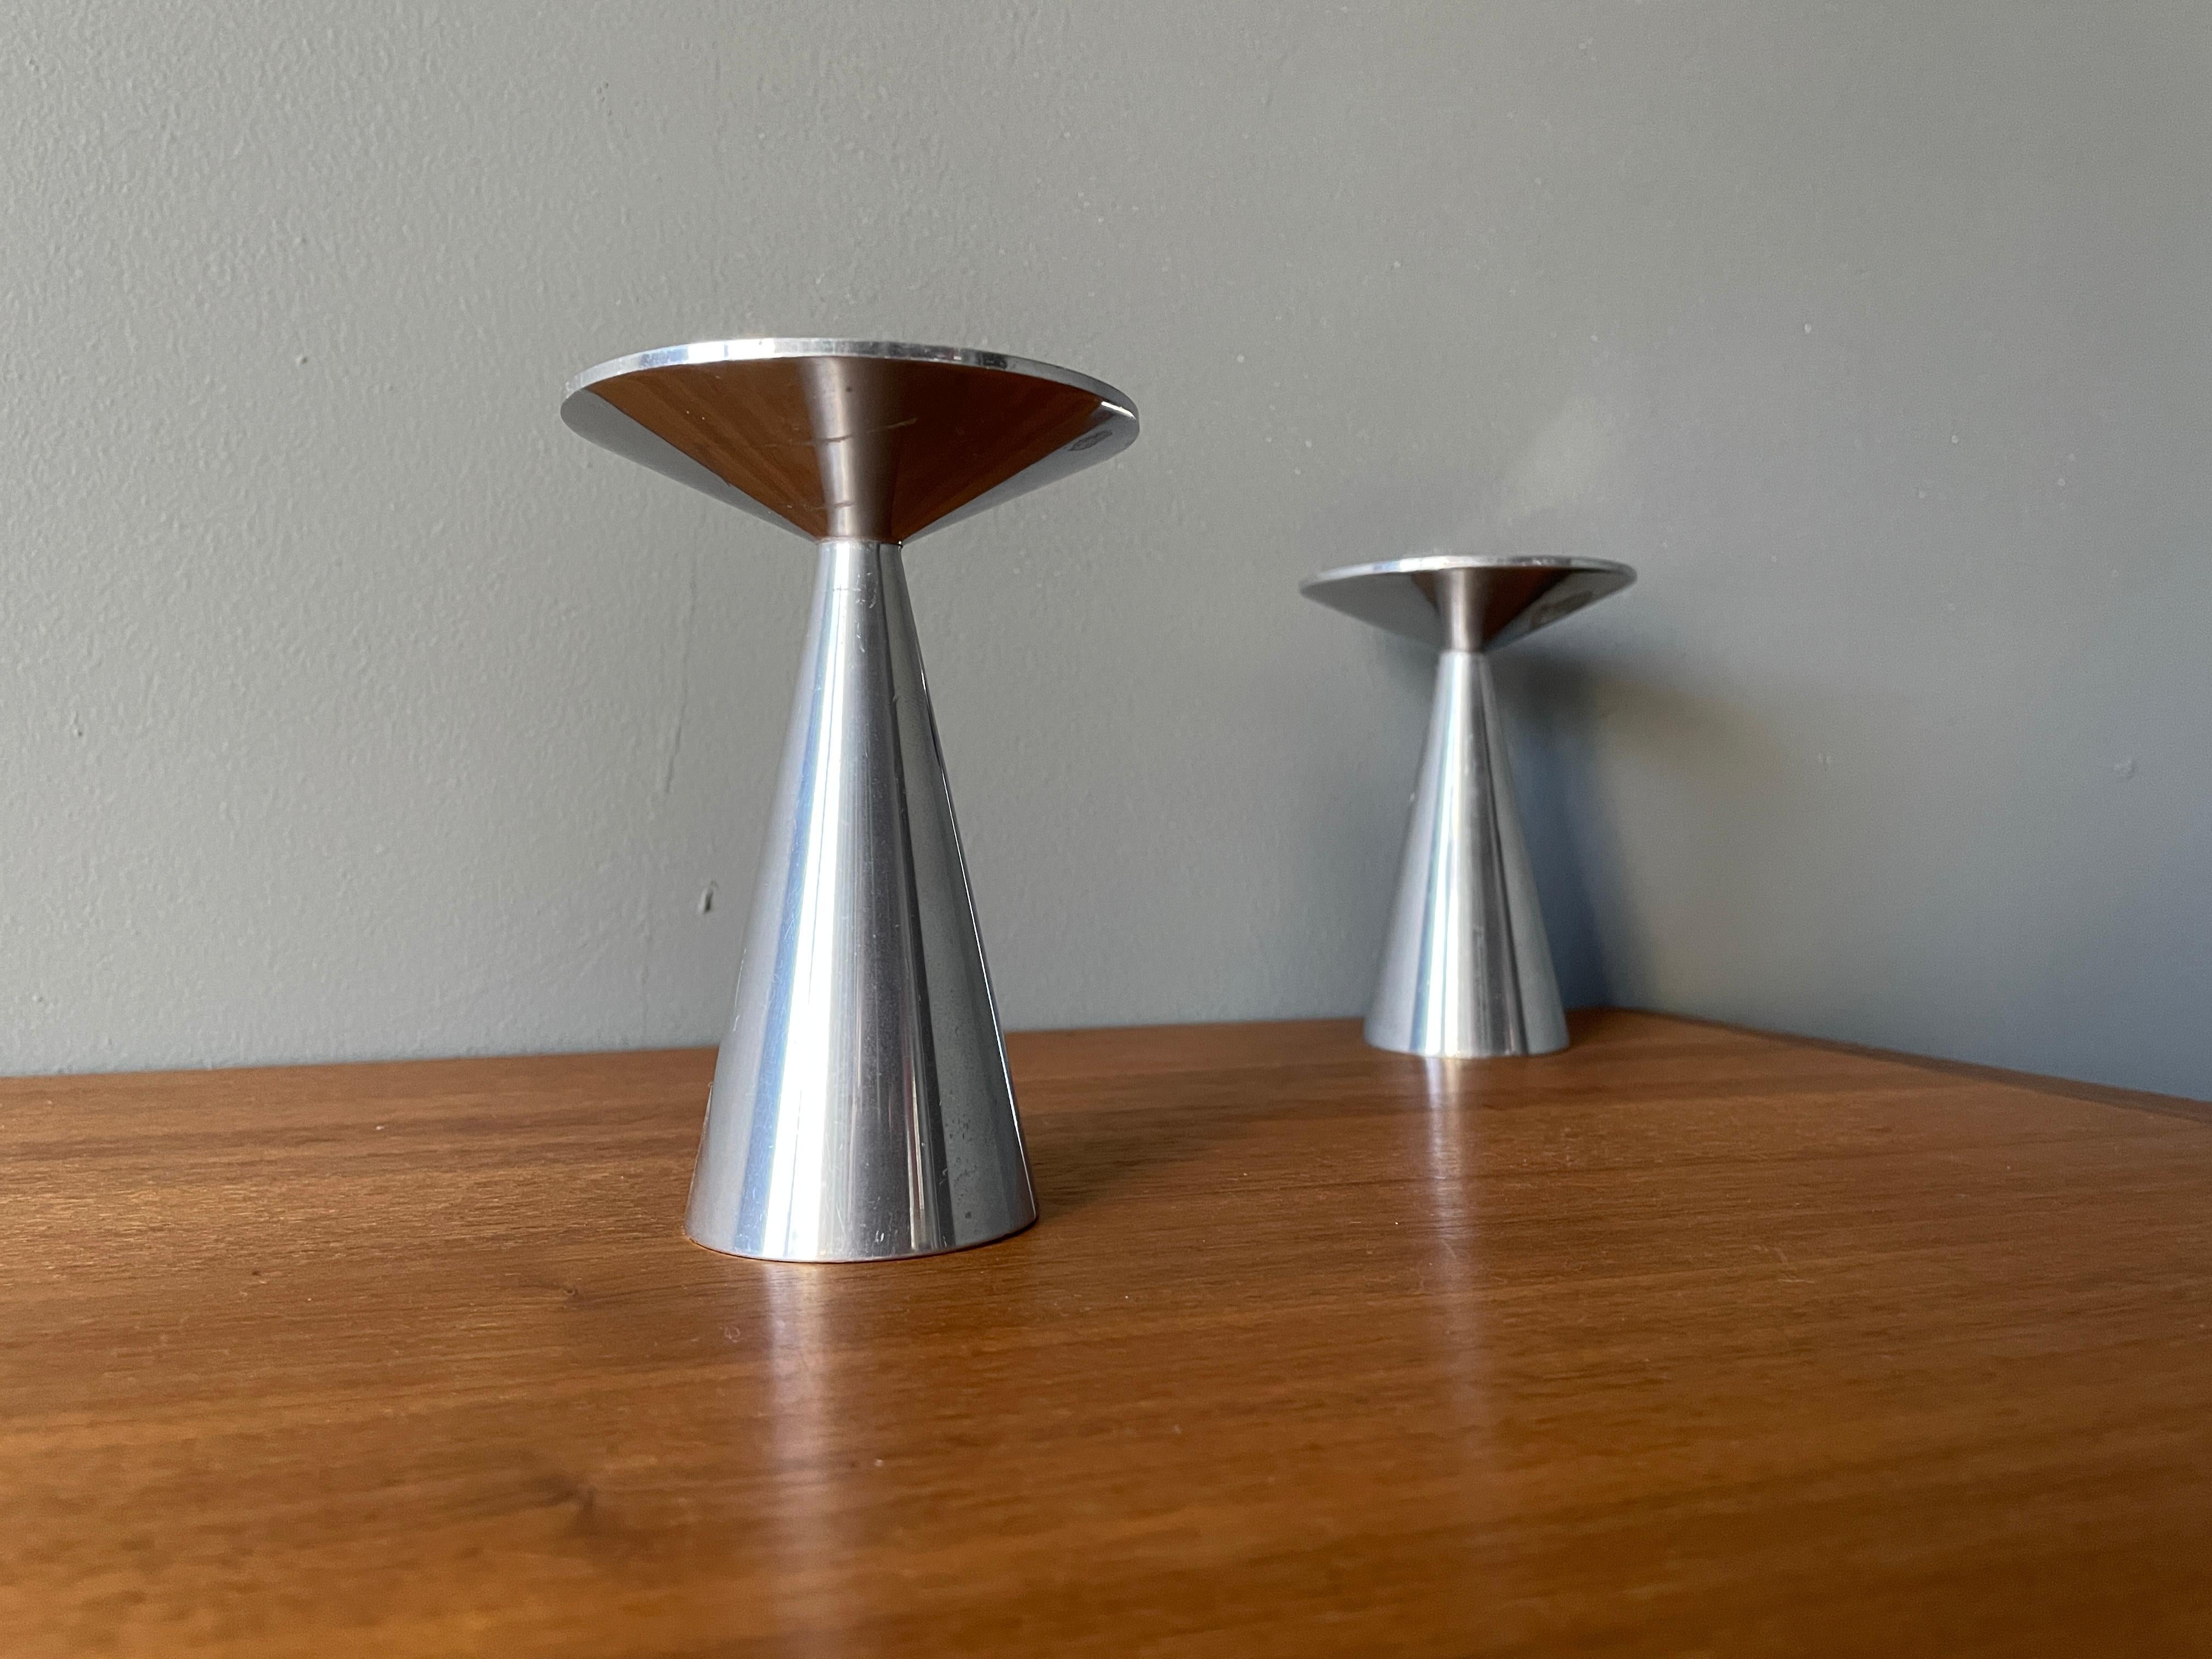 Pair of vintage Mid-Century Modern spun aluminum candle holders. Beautiful design and composition. Fits 2 larger size candles.